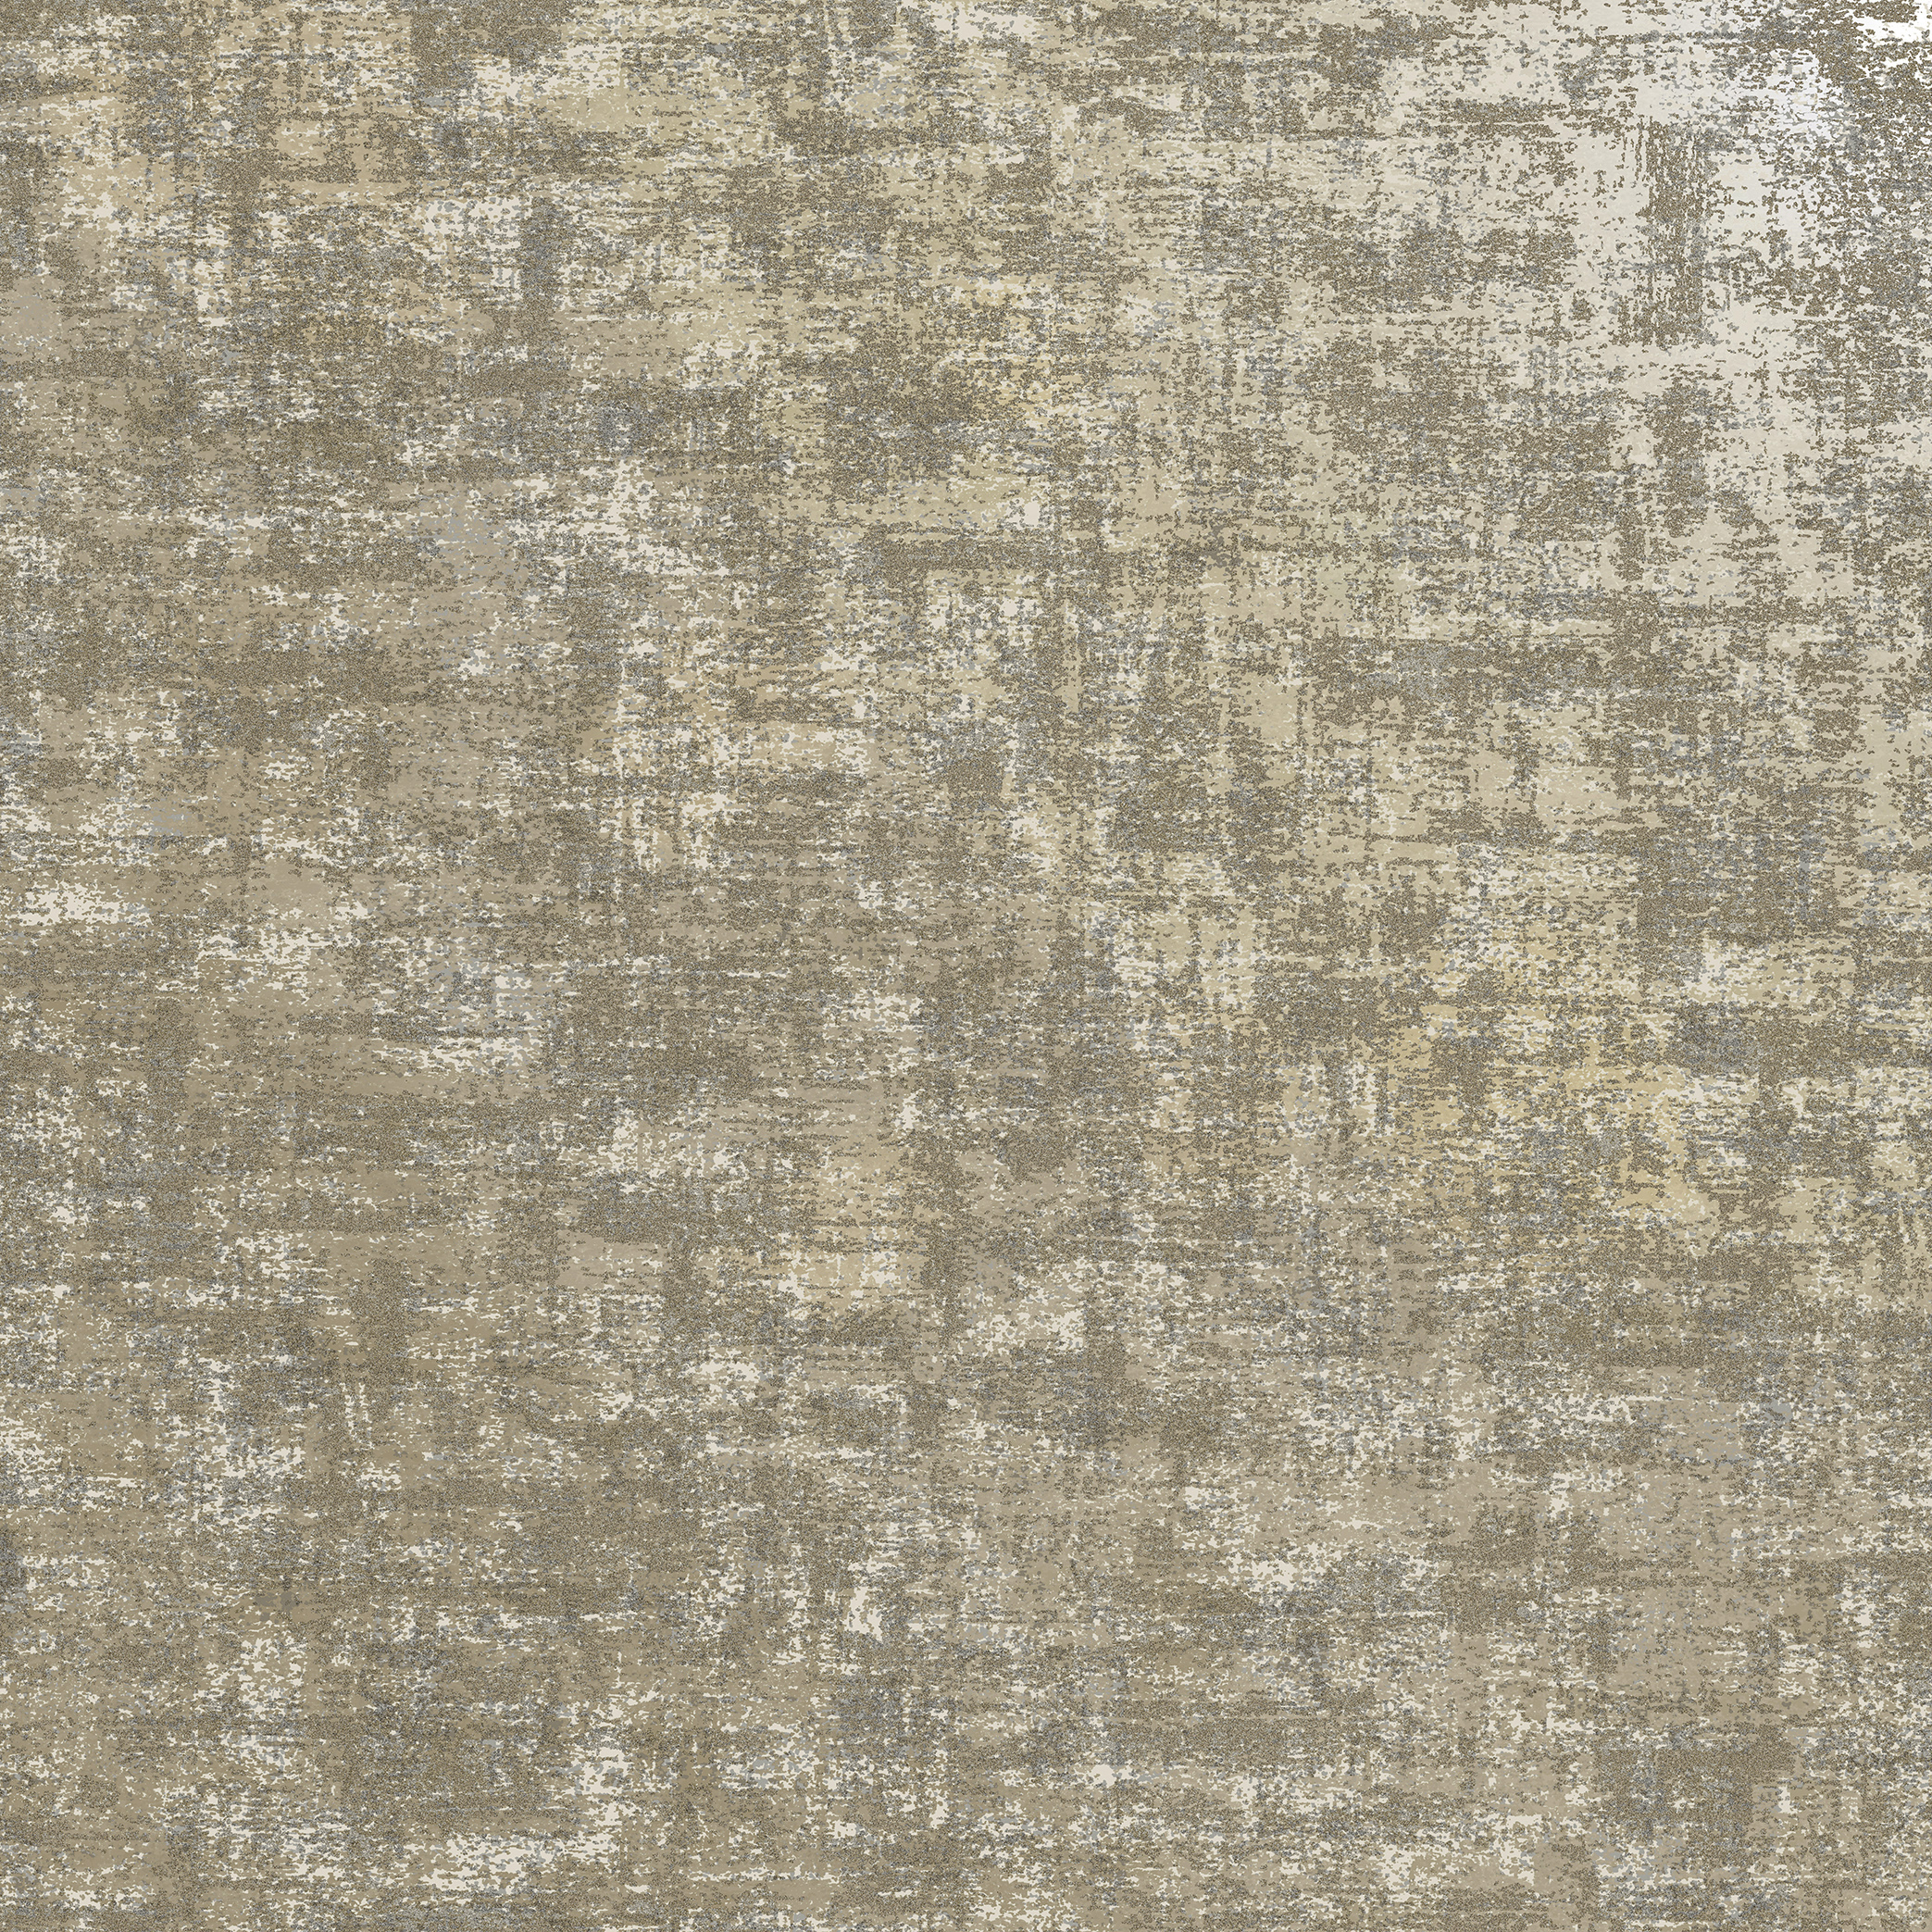 Image of Holden Decor Brindle Bead Texture Taupe & Gold Wallpaper - 10.05m x 53cm